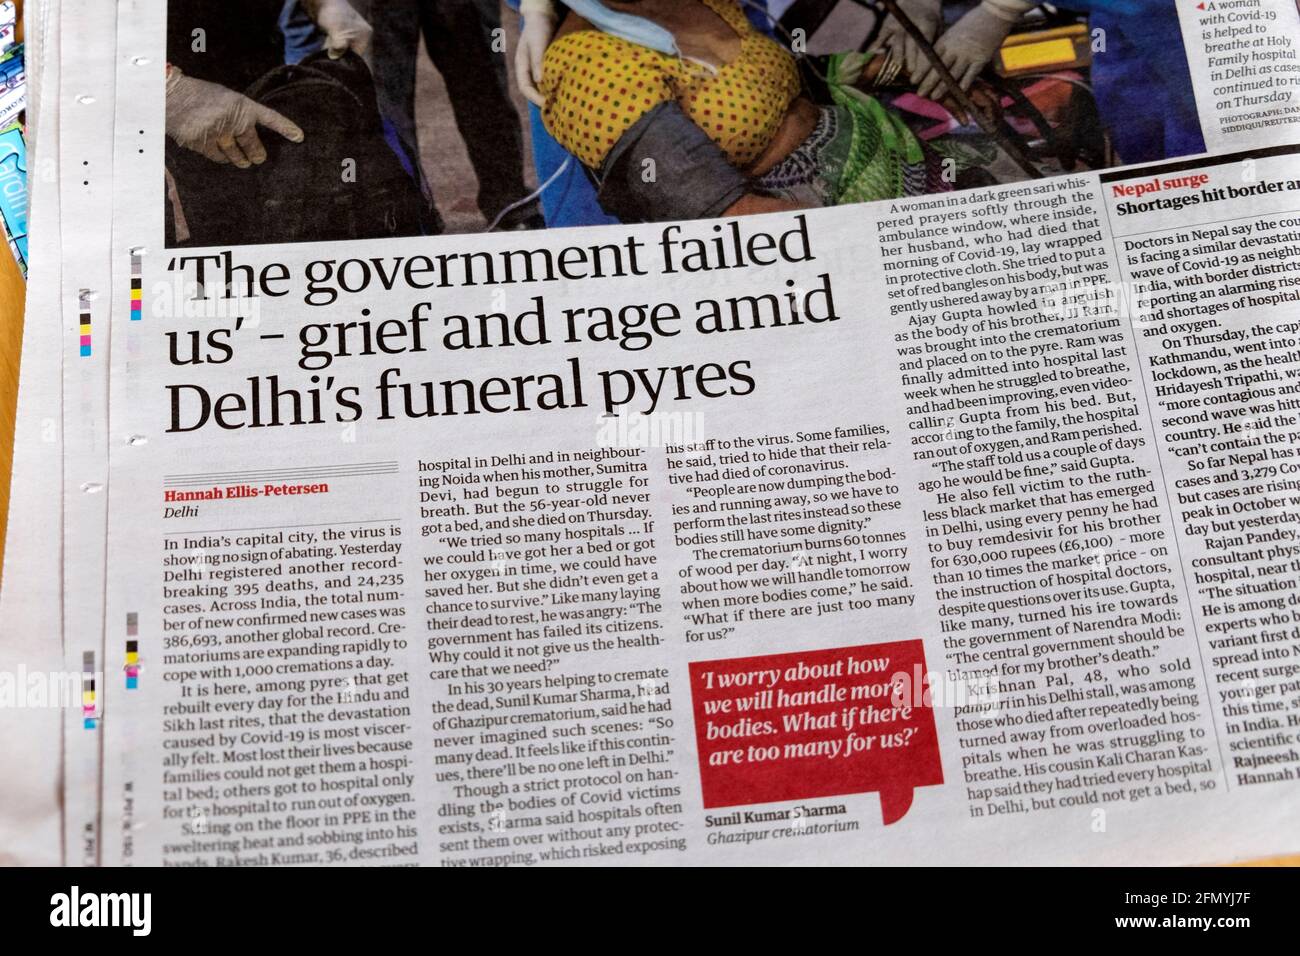 ' 'The government failed us' - grief and rage amid Delhi's funeral pyres' newspaper headline article in Guardian on 1May 2021 London Great Britain UK Stock Photo